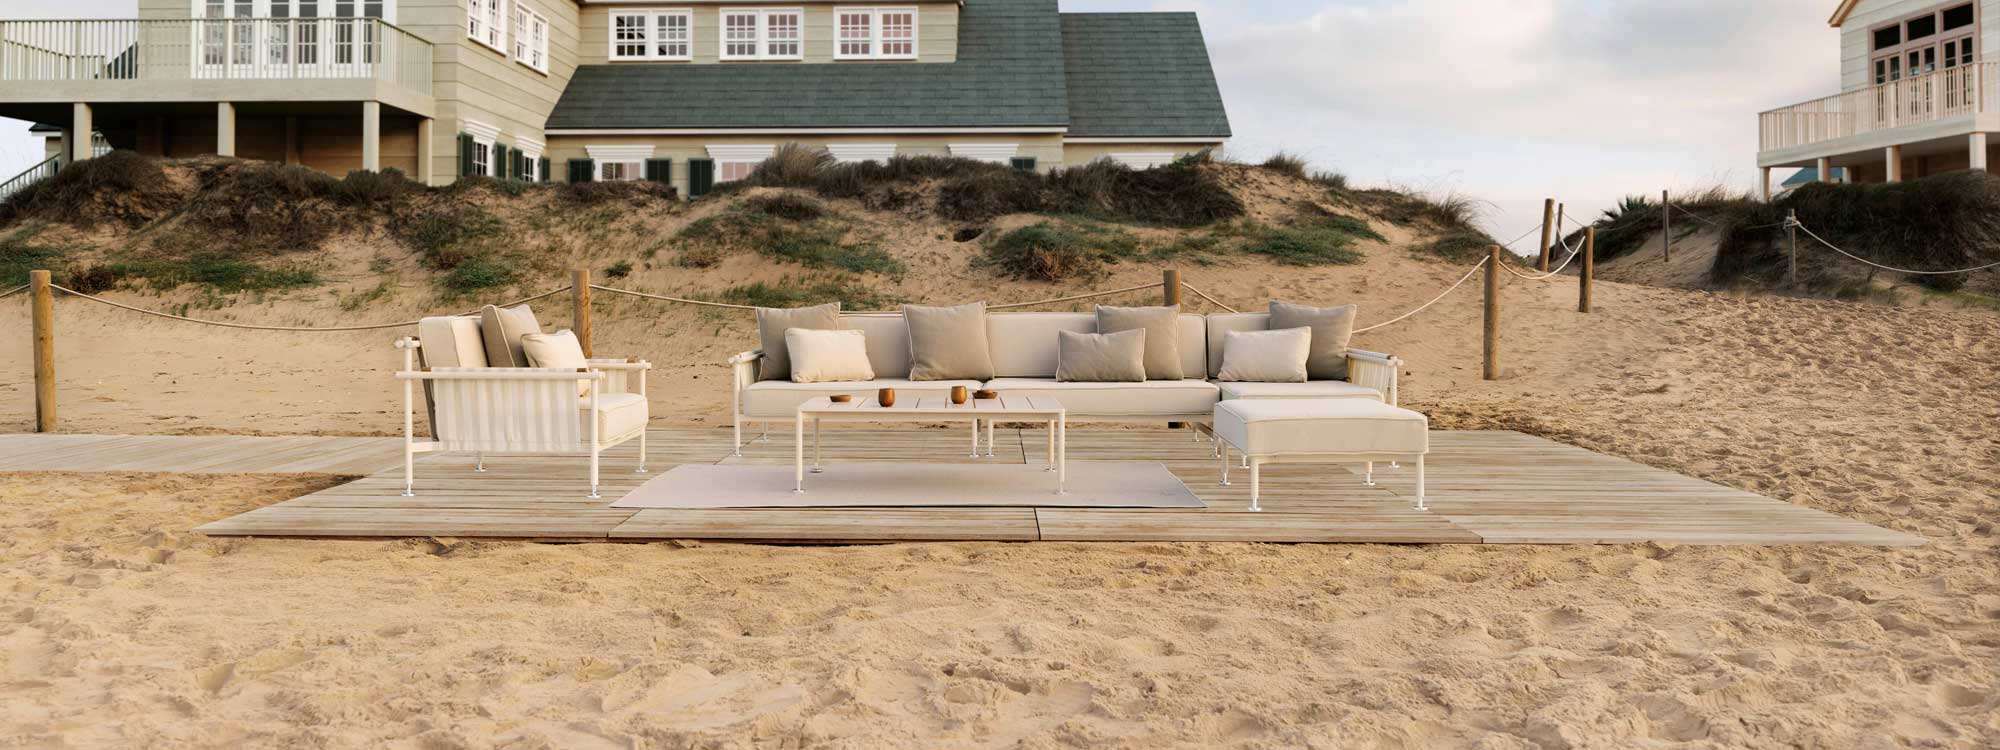 Image of Vondom Hamptons sectional garden sofa on wooden decking on the beach, with large beachside house in the background